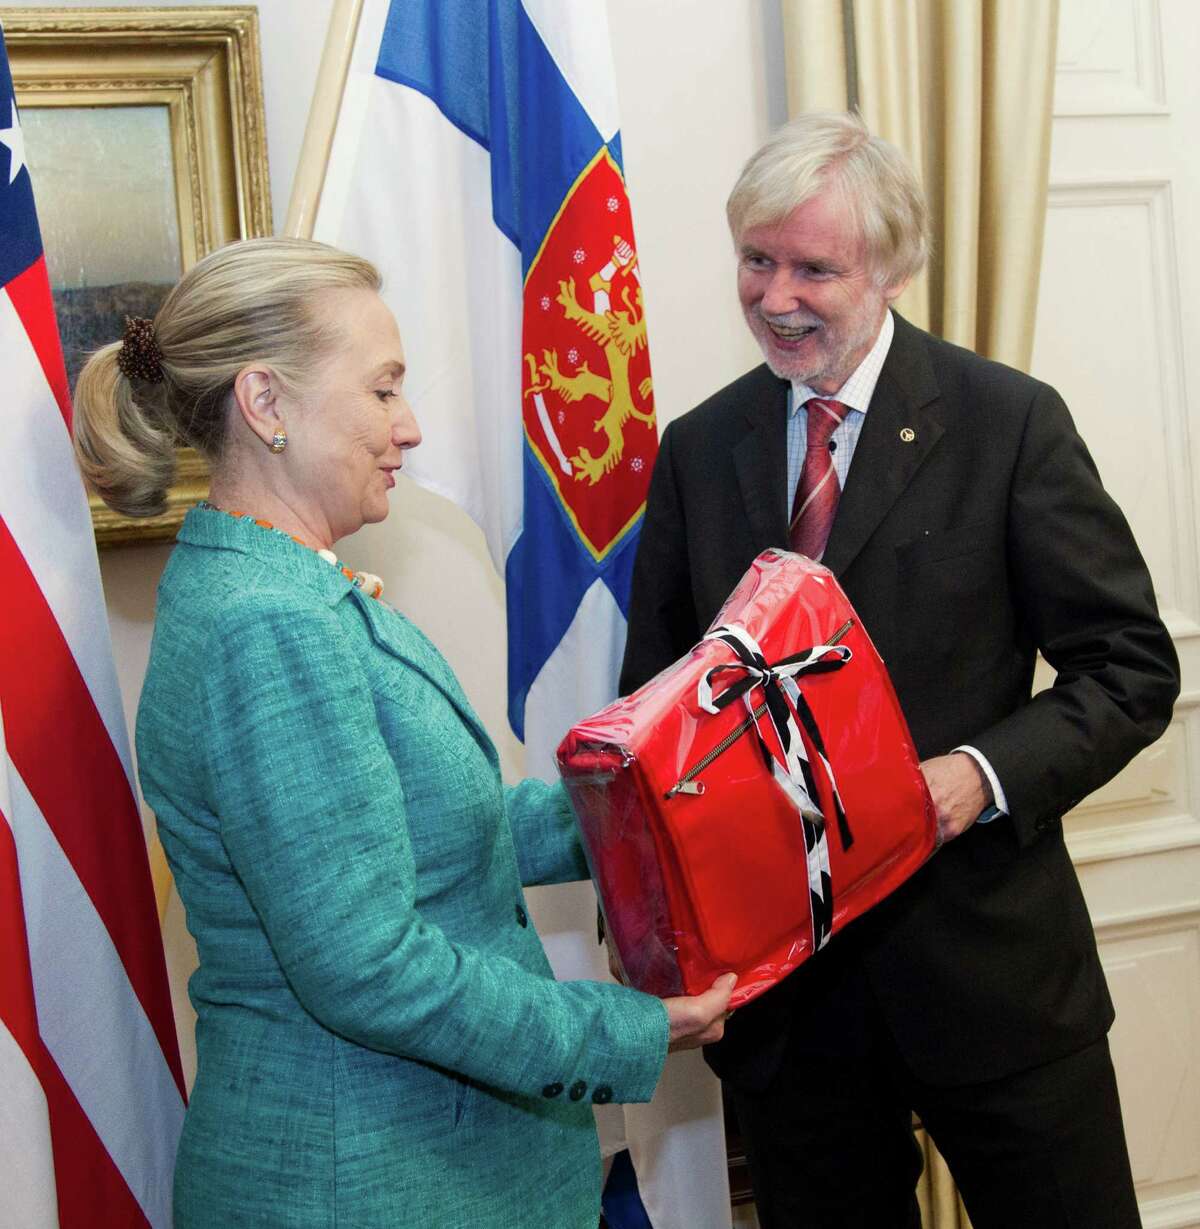 FILE - In this June 27, 2012 file-pool photo, then-Secretary of State Hillary Rodham Clinton receives a gift from Finnish Foreign Minister Erkki Tuomioja at the Government Banquet Hall in Helsinki, Finland. Former Secretary of State Hillary Rodham Clinton has outpaced President Barack Obama when it comes to lavish gifts from foreign leaders. State Department documents released Friday show Clinton got gold jewelry worth a half-million dollars from King Abdullah of Saudi Arabia, while Obamaâs most expensive gift was a $16,500 gold-plated clock from Crown Prince Salman bin Abdulaziz al-Saud, the Saudi defense minister. The gifts were among a bounty of vases, watches, art work and other items given to top U.S. officials in 2012, according to the departmentâs Office of Protocol, which catalogs the gifts and publishes an annual listing. (AP Photo/Haraz N. Ghanbari, Pool)